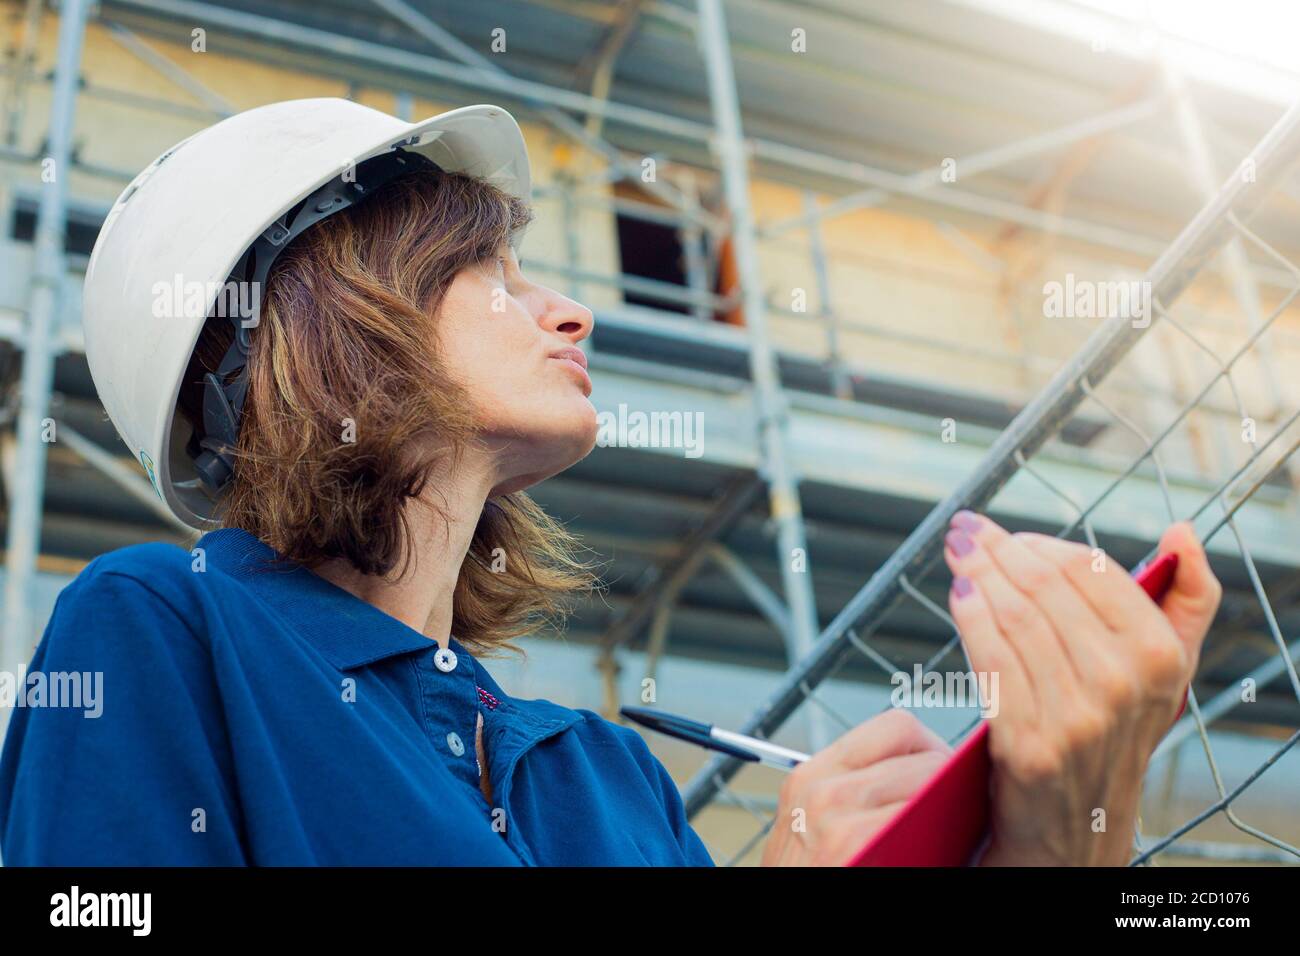 Woman, female engineer, caucasian, age 40, wearing a safety white cap, working on a costruction site in a typical men's role. Gender gap symbol. Stock Photo